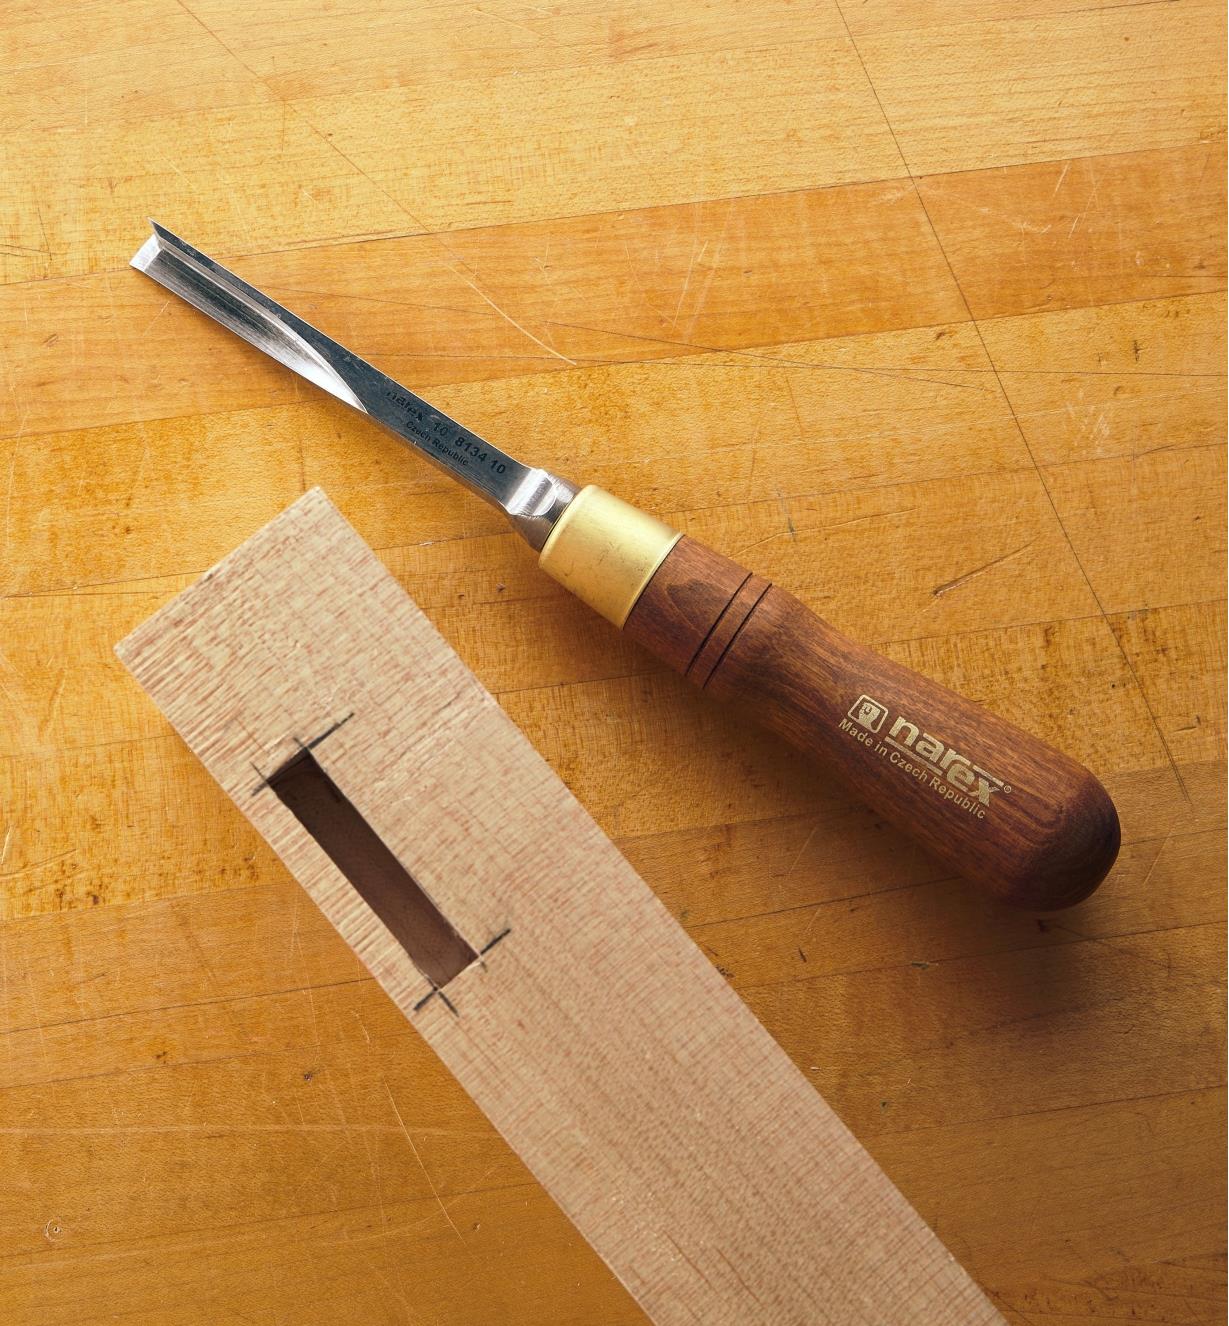 Wood with a mortise next to a corner chisel